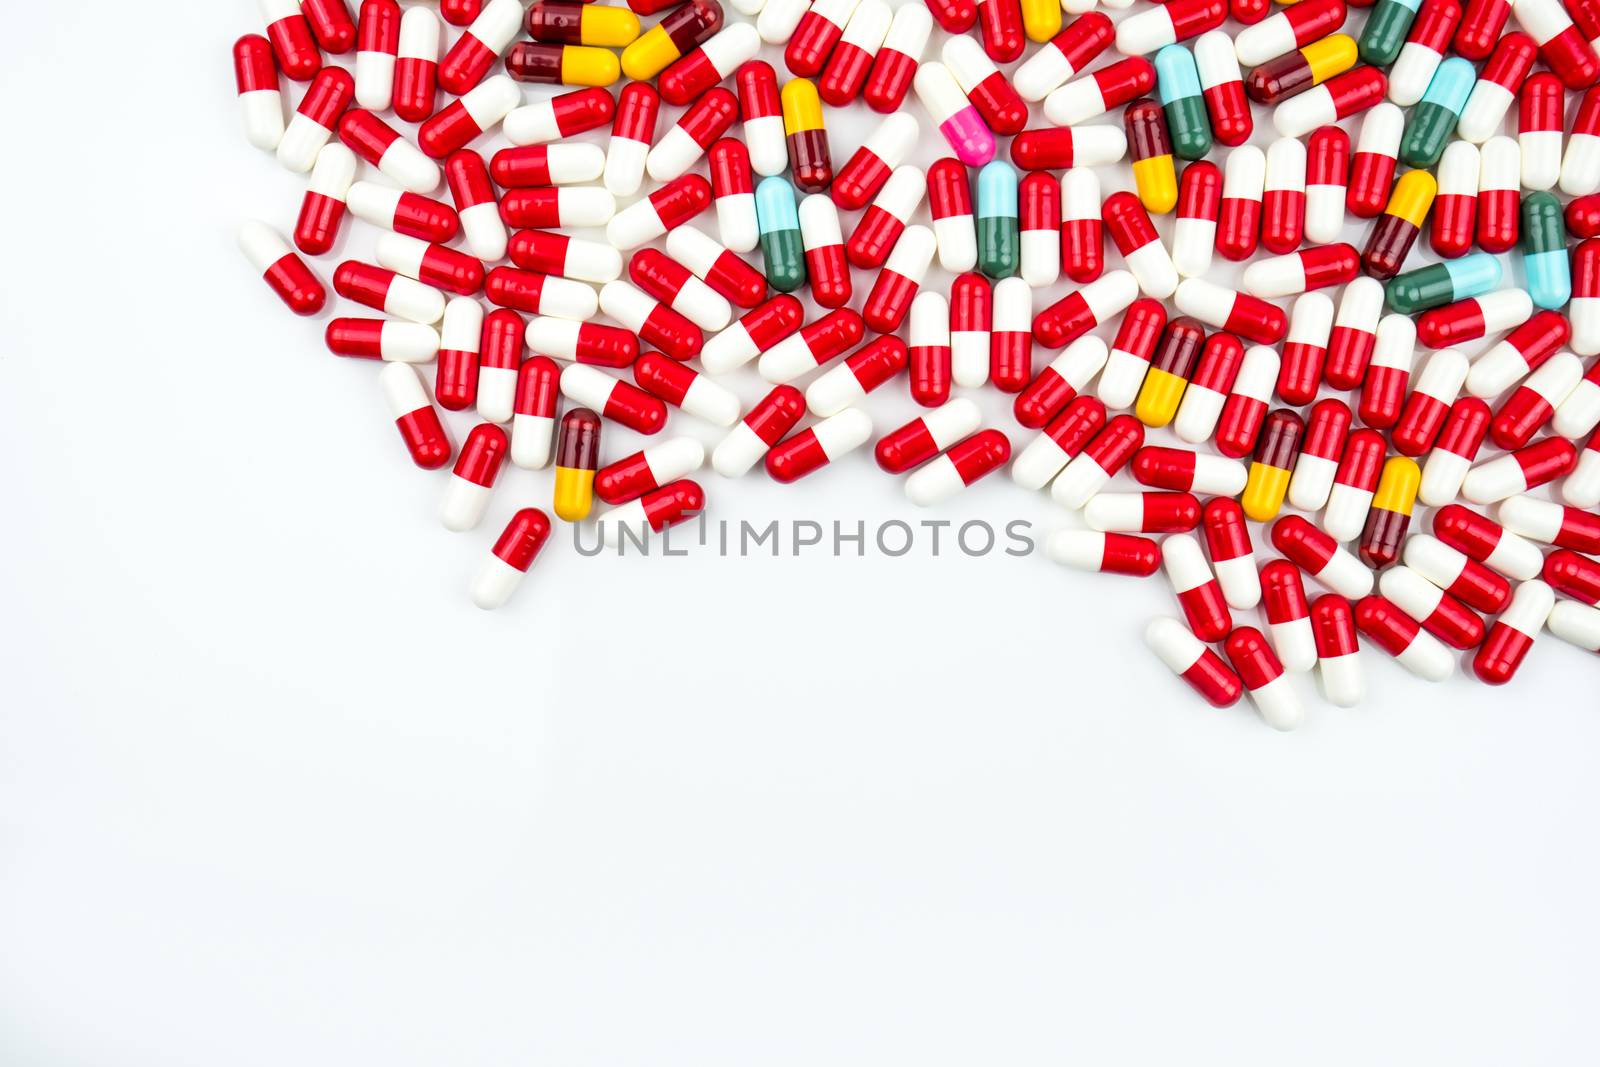 Colorful of antibiotic capsules pills isolated on white background with copy space. Drug resistance concept. Antibiotics drug use with reasonable and global healthcare concept. Pharmaceutical industry. Pharmacy background.